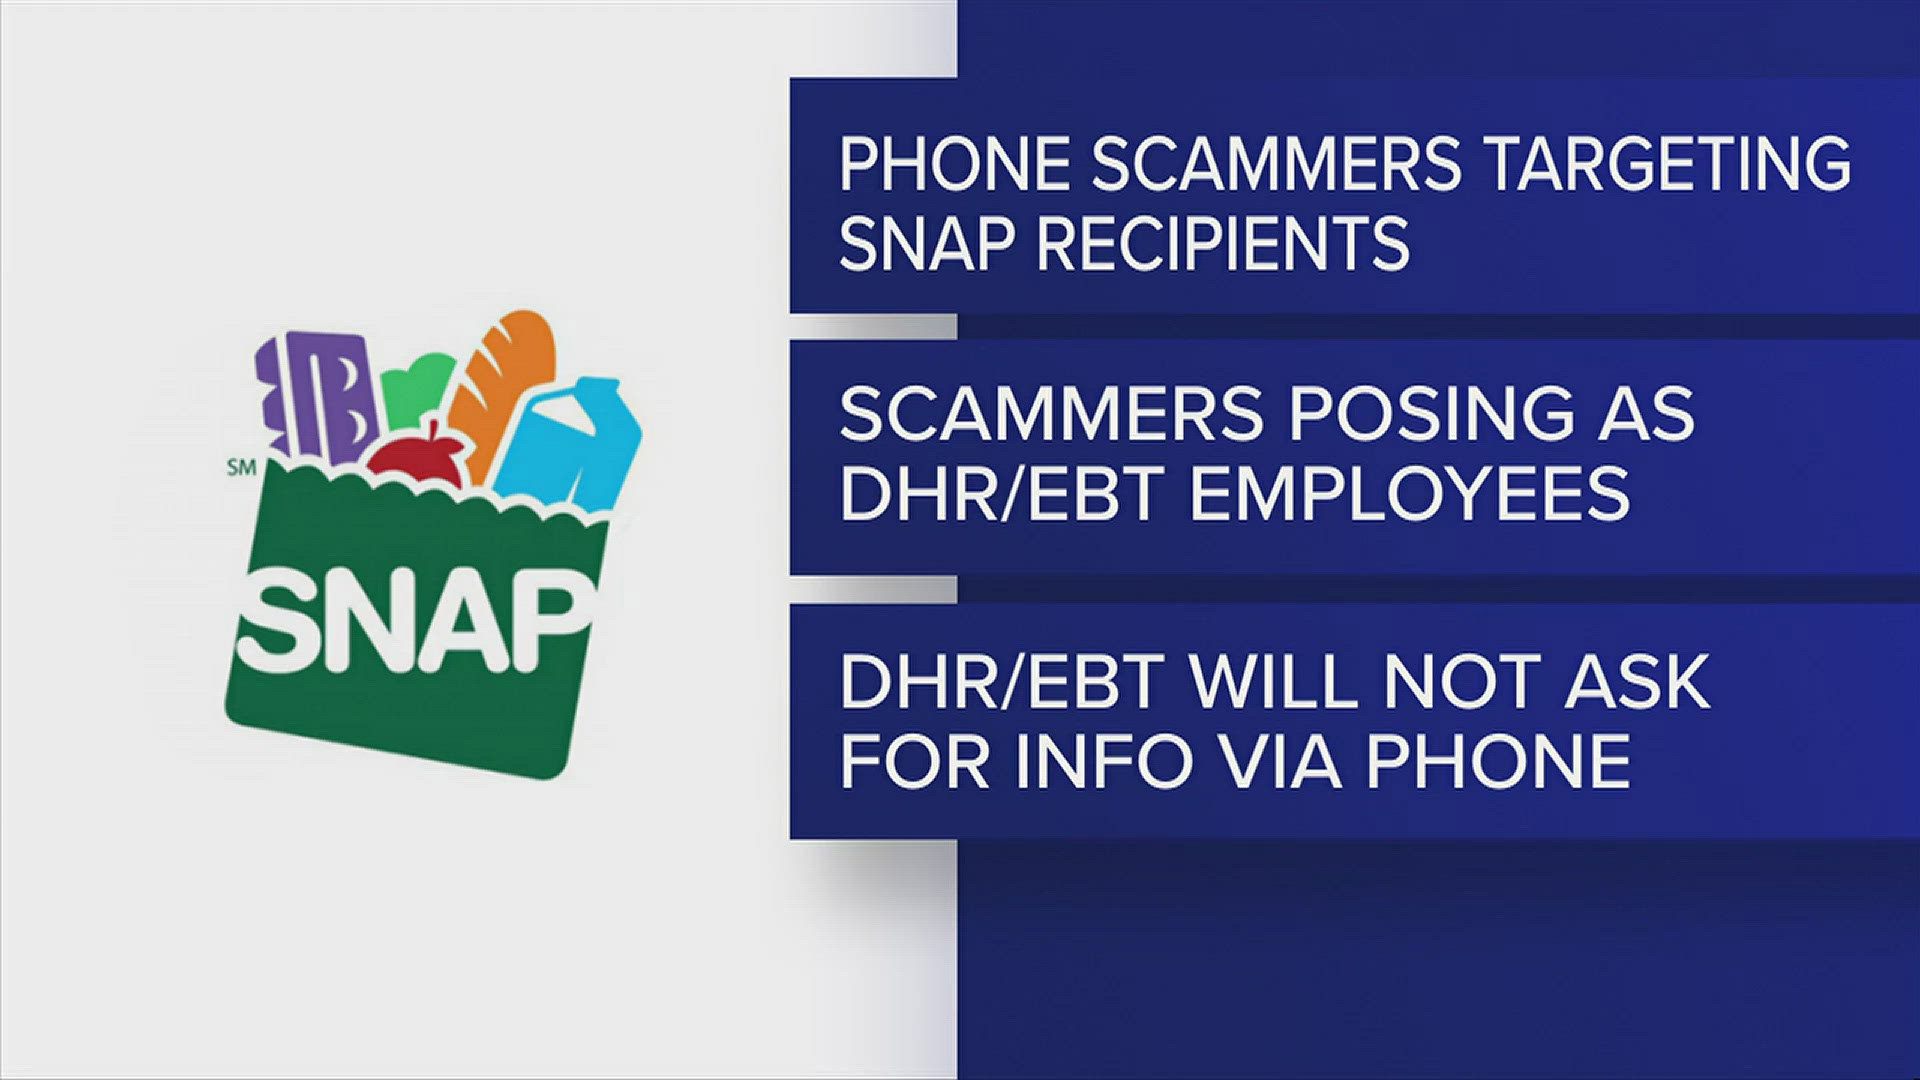 DHR recommends some tips to protect against the scam.